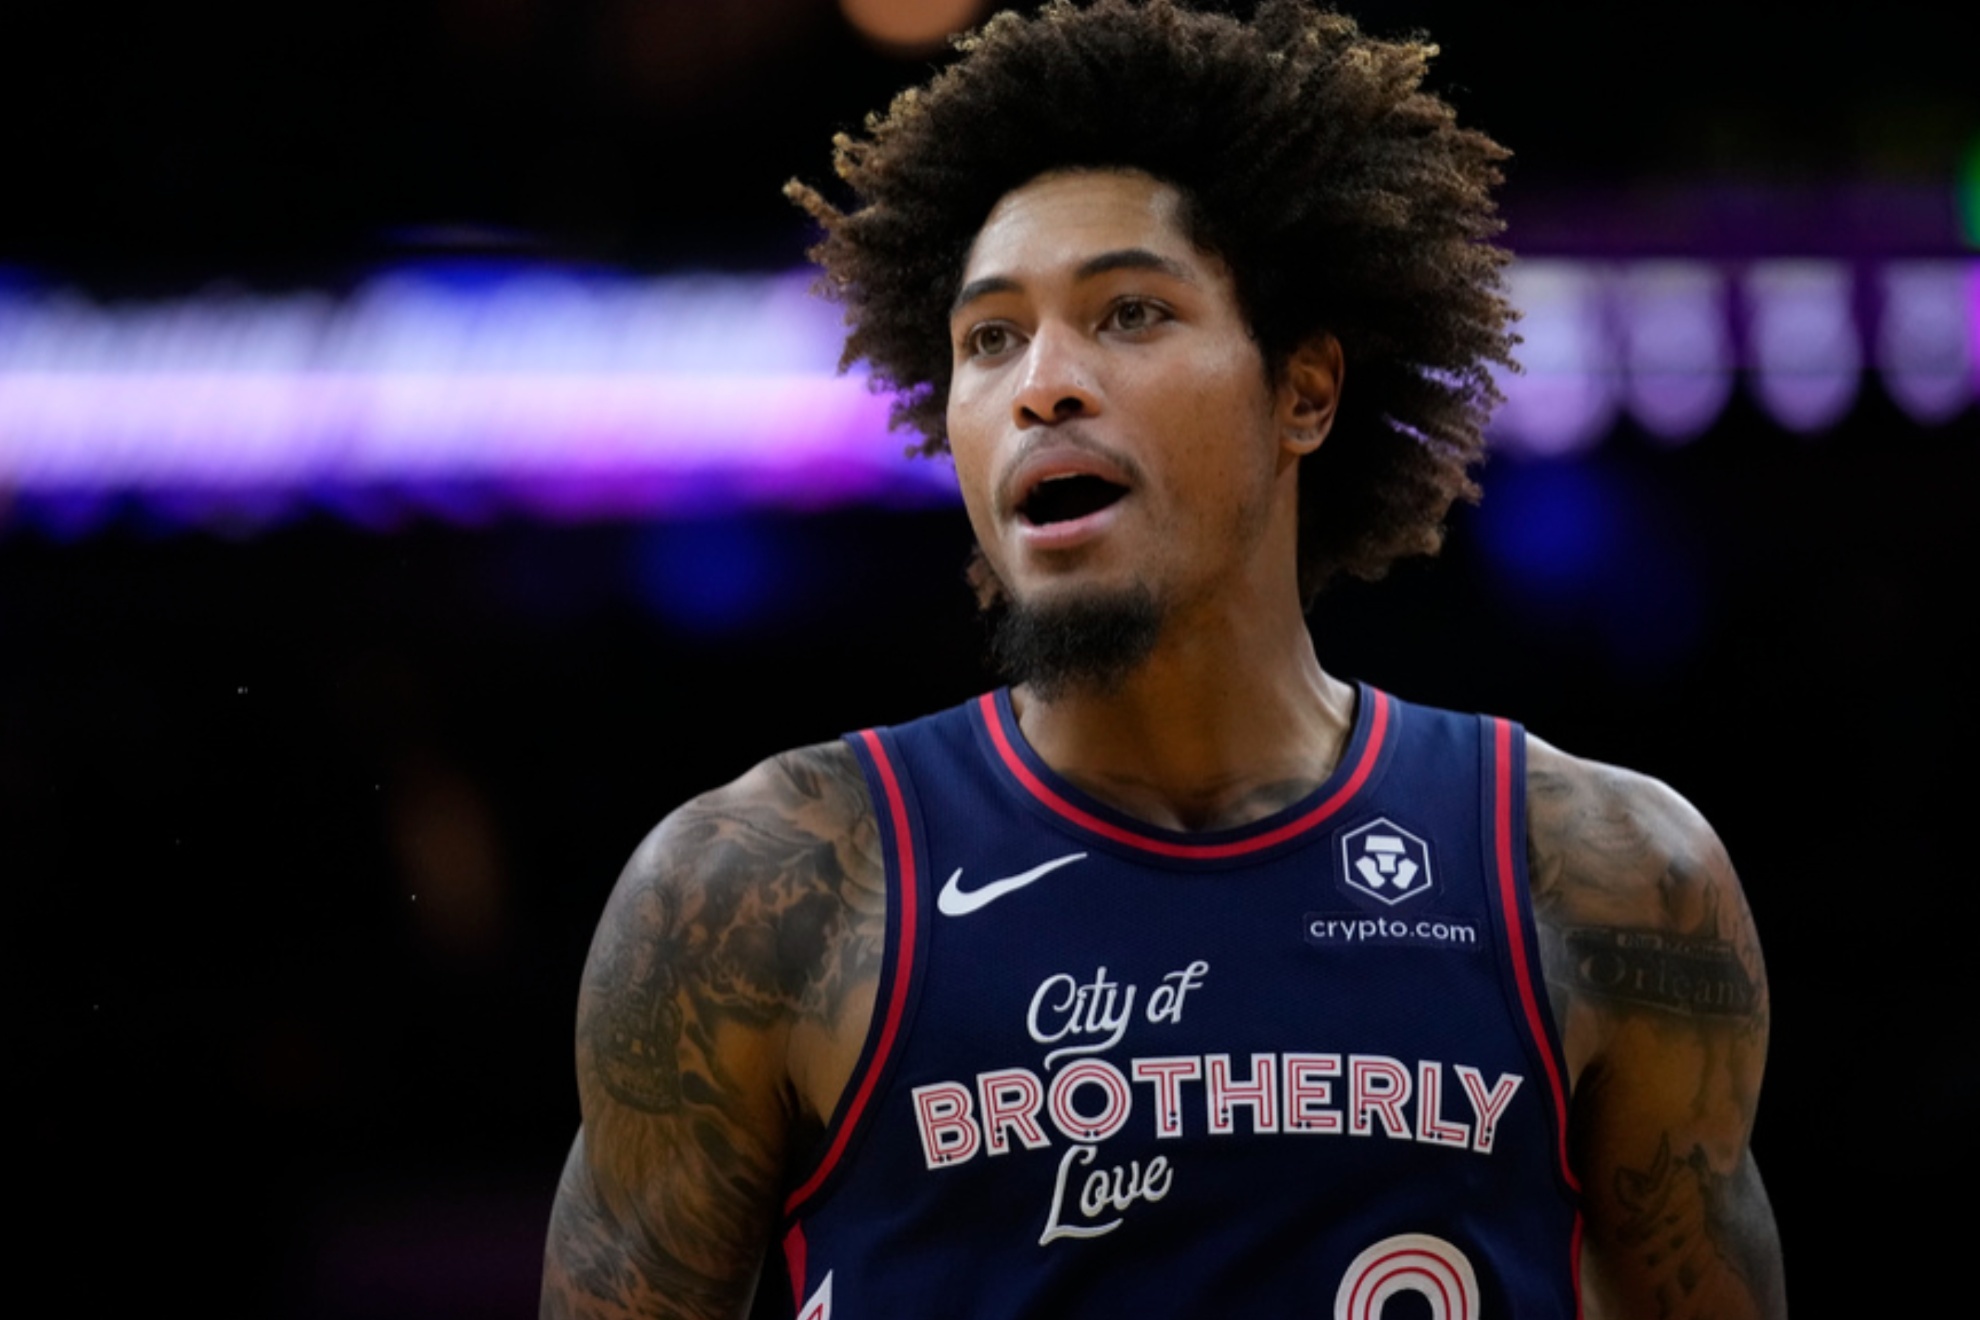 New footage shows Kelly Oubre Jr. struggling to get home after getting hit by a car